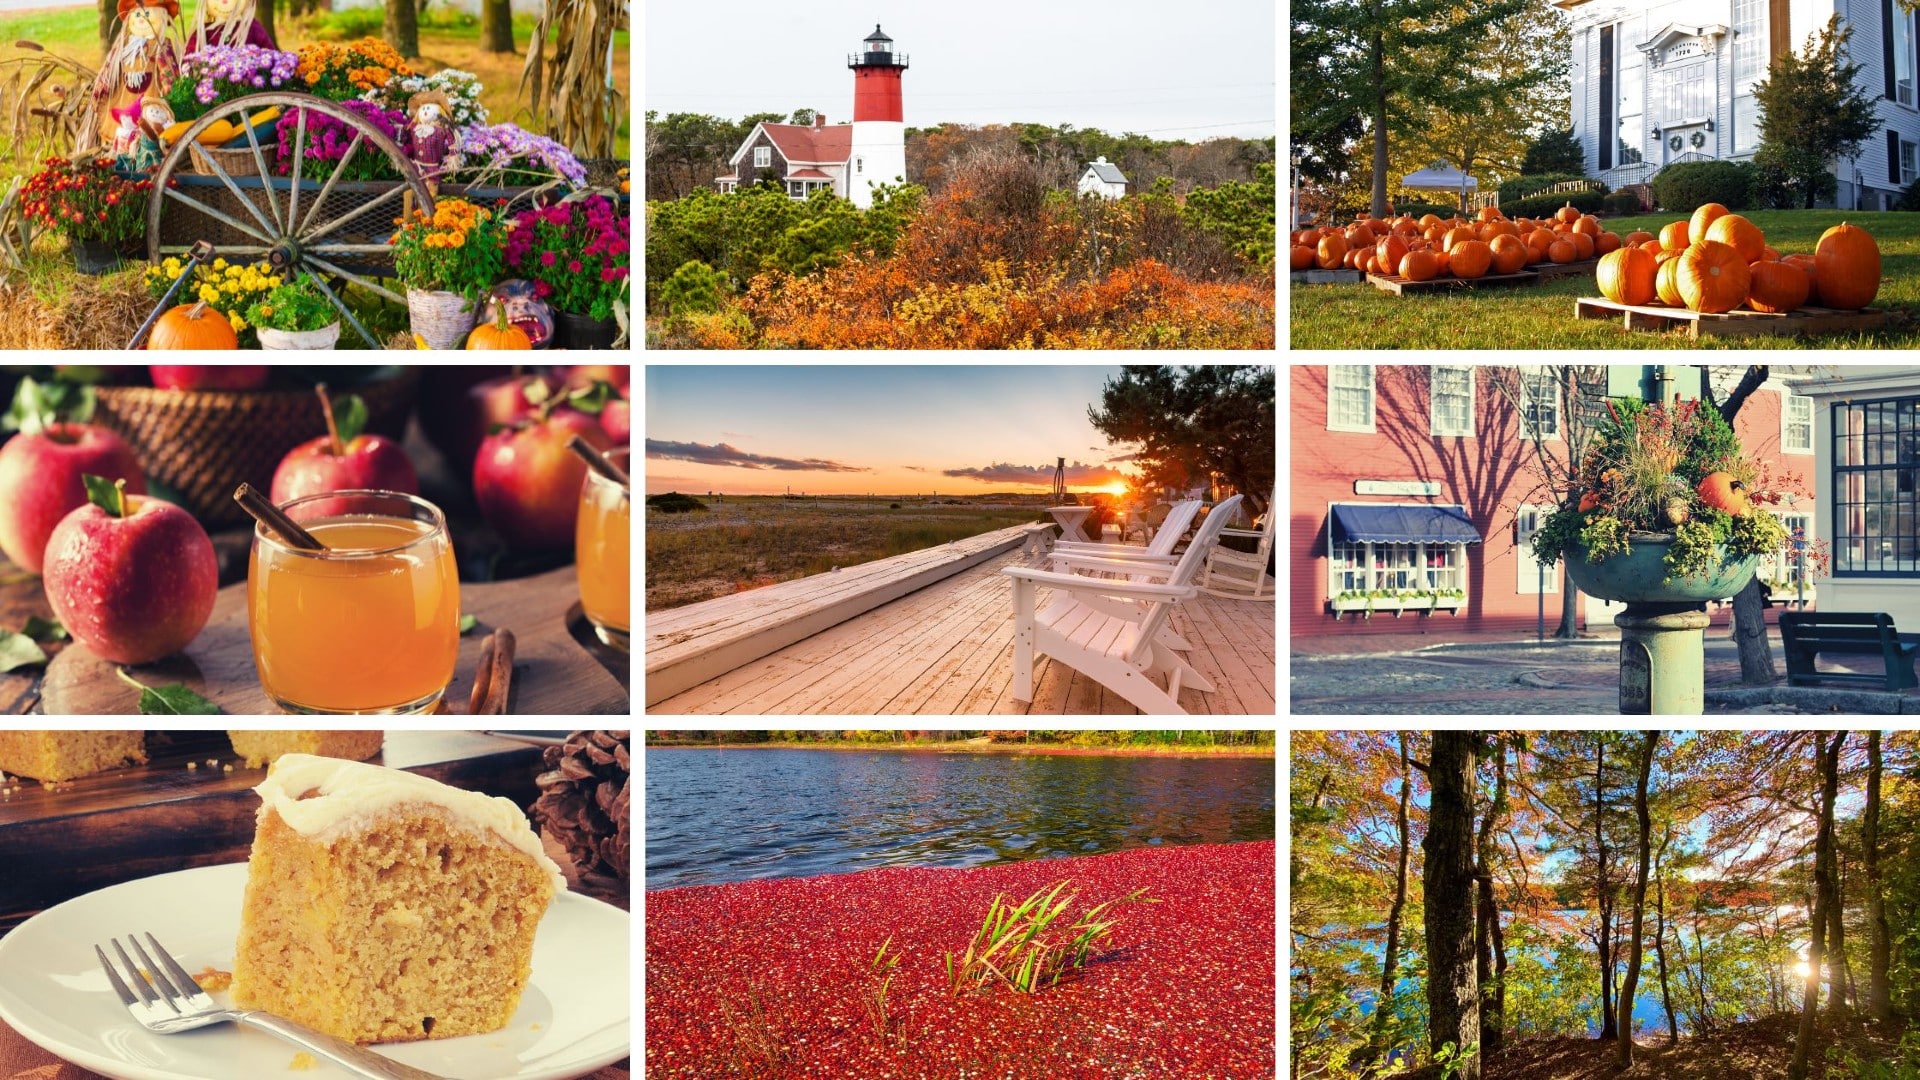 A Series of fall pictures in a collage showing cranberry bog, lighthouse, pumpkin bread, apple cider and fall scenery